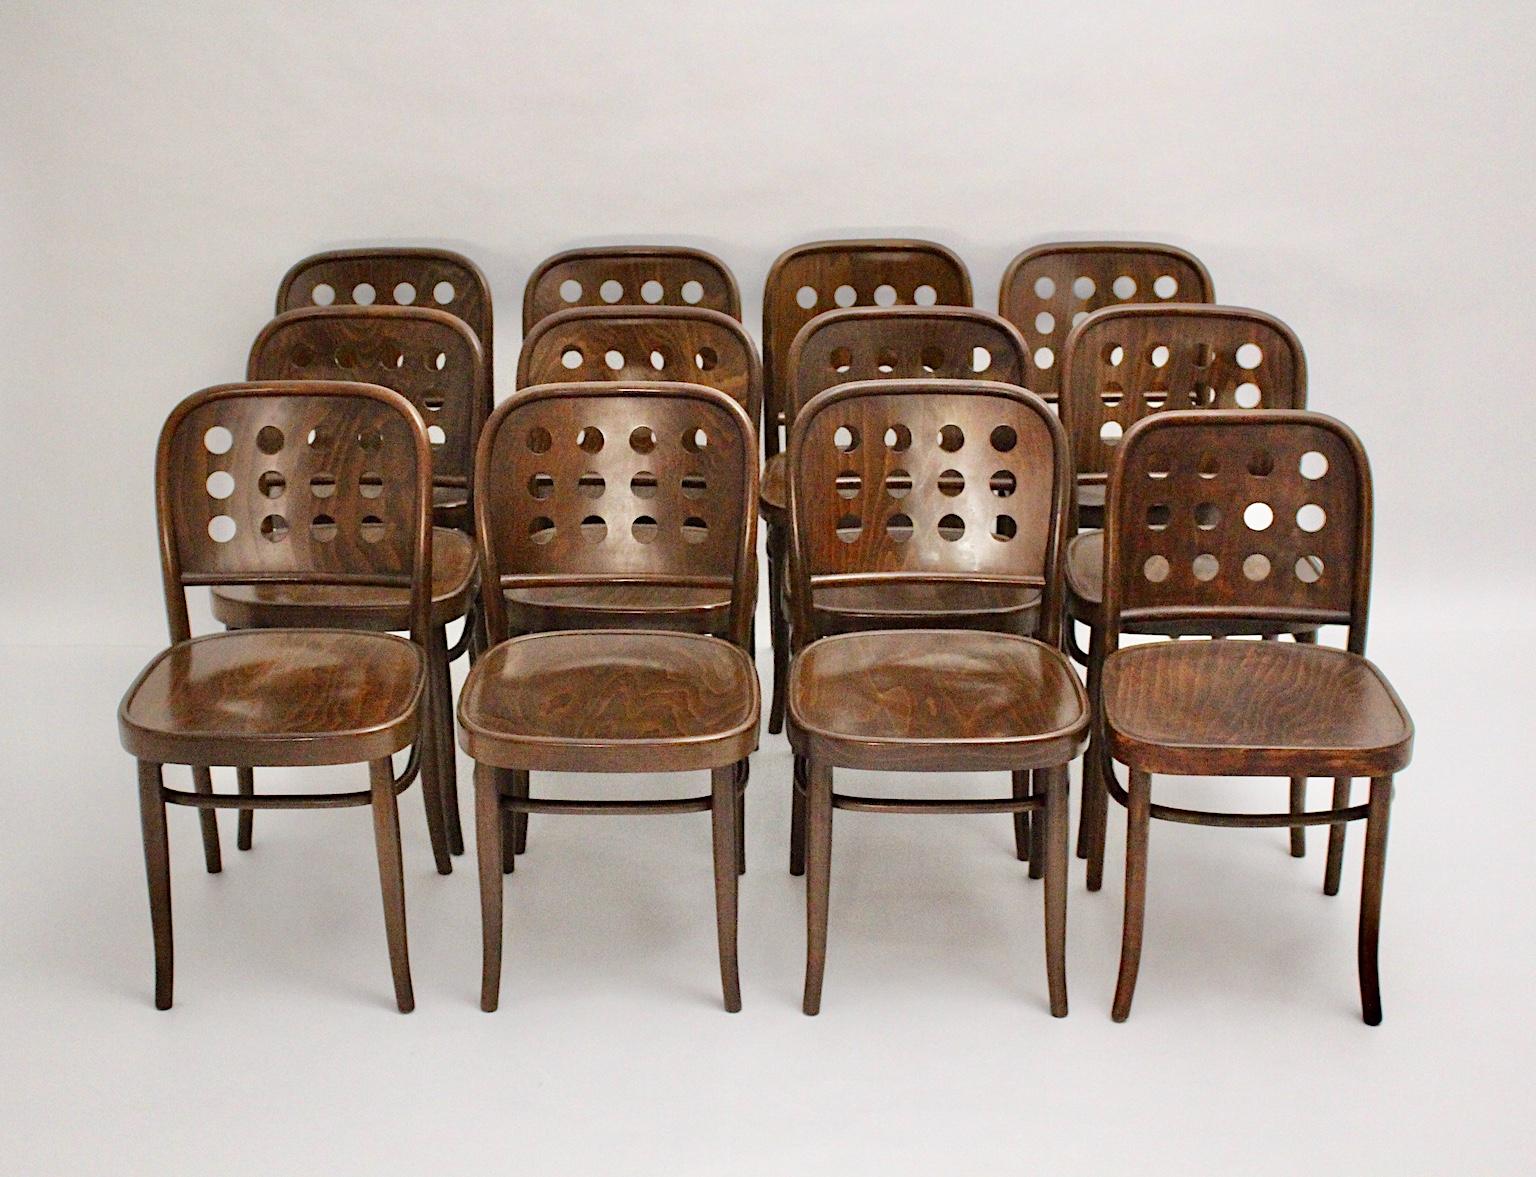 Josef Hoffmann style 12 vintage dining chairs from beech bentwood in chocolate brown color tone 1990s in an amazing shape.
While the backrest features 12 holes for an interesting form, the seat invites with for a comfortable seating.
The dining